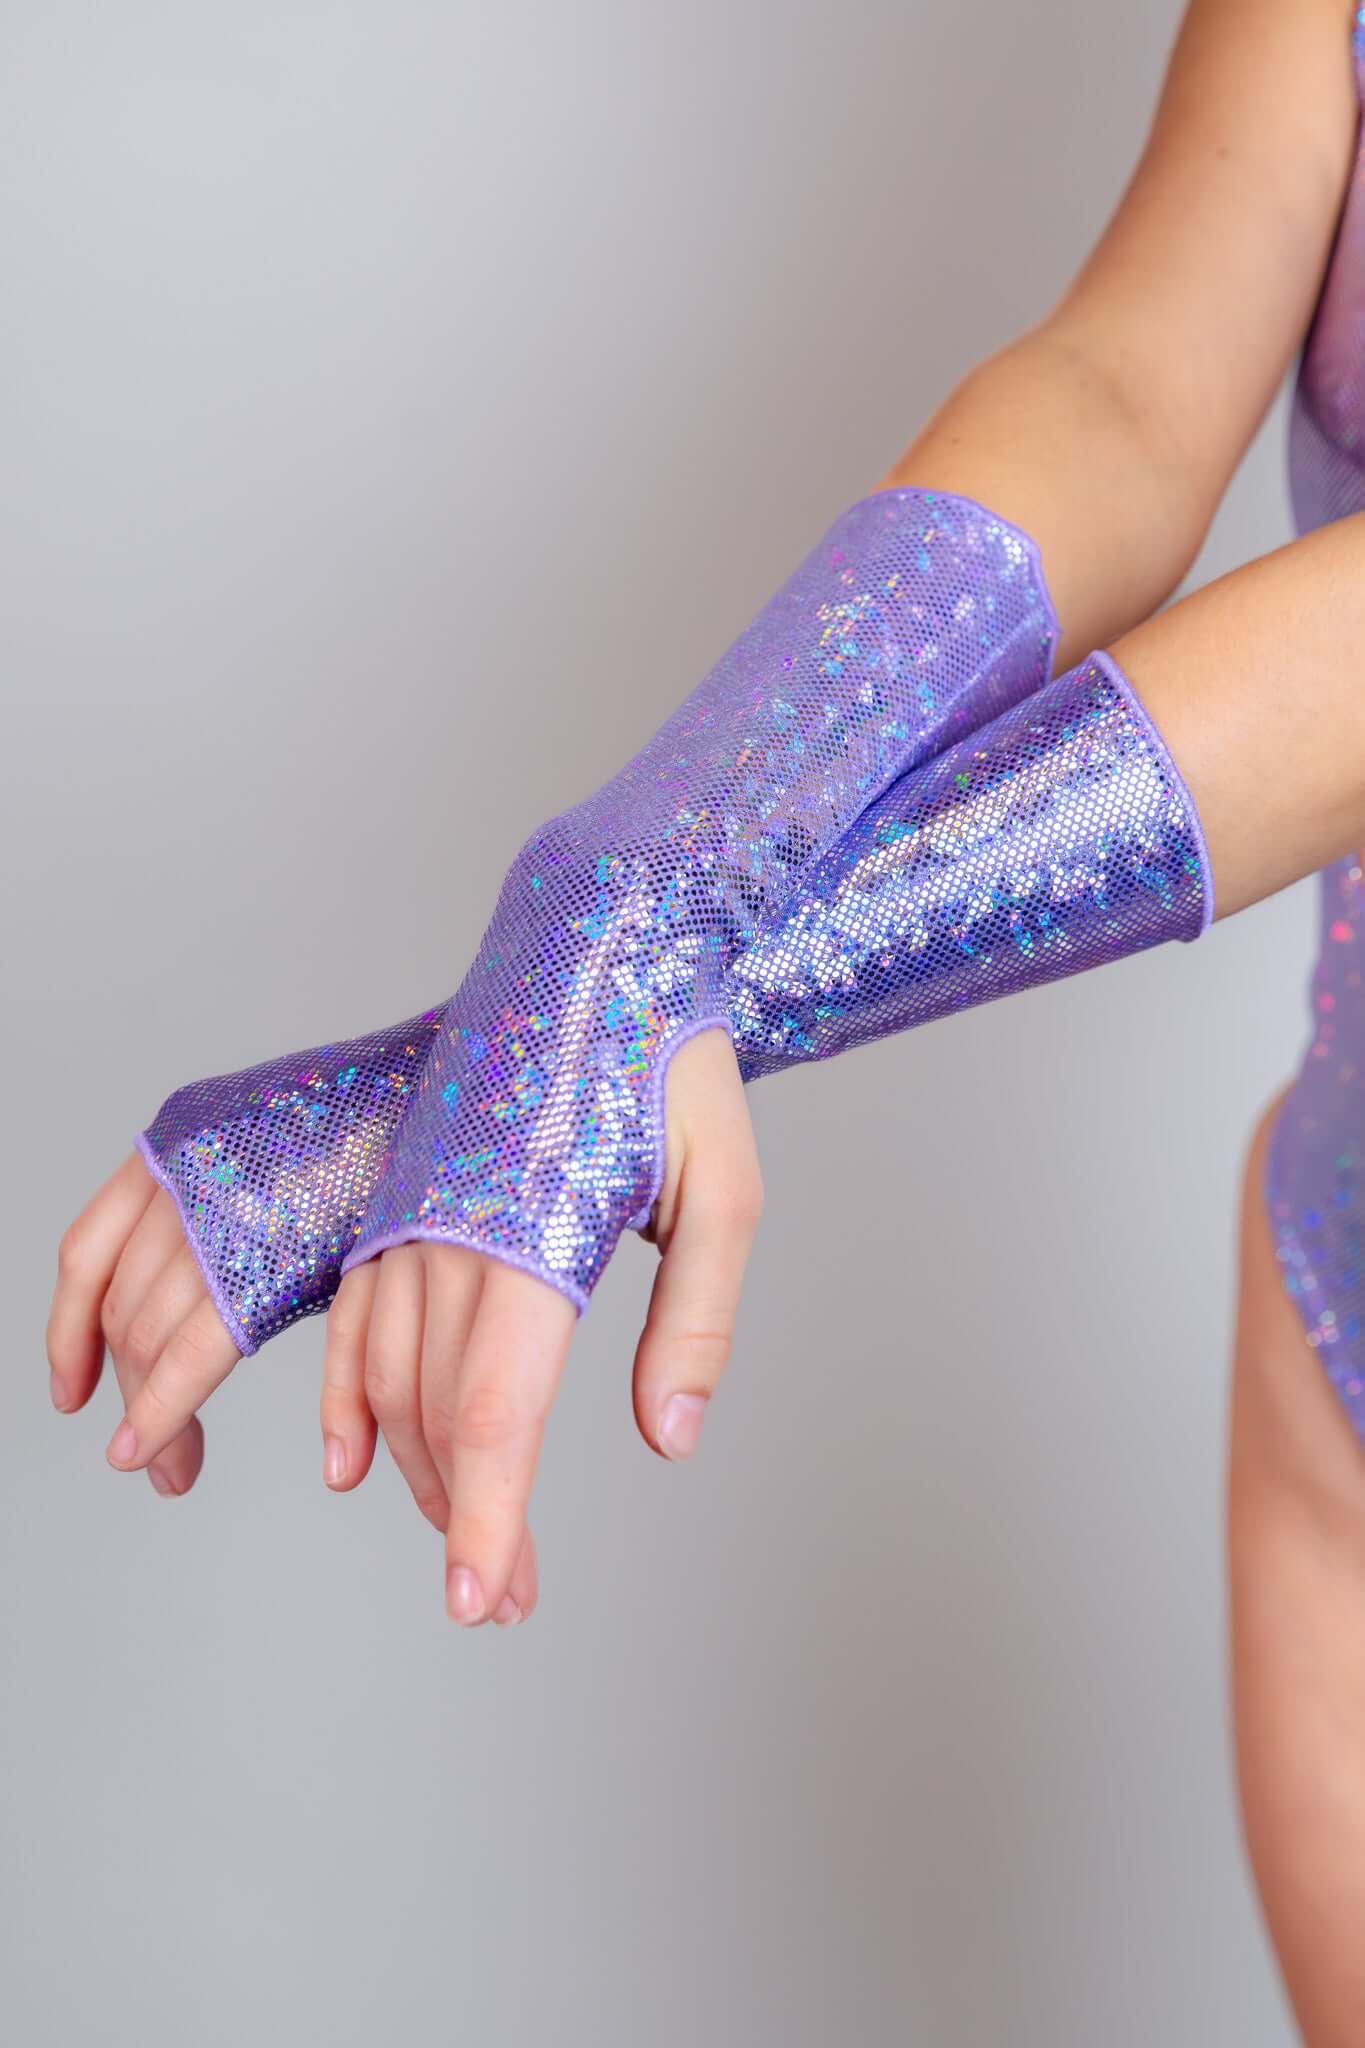 Close-up of a model's arm wearing a sparkling lavender glove, accentuating a dazzling sequined finish from Freedom Rave Wear